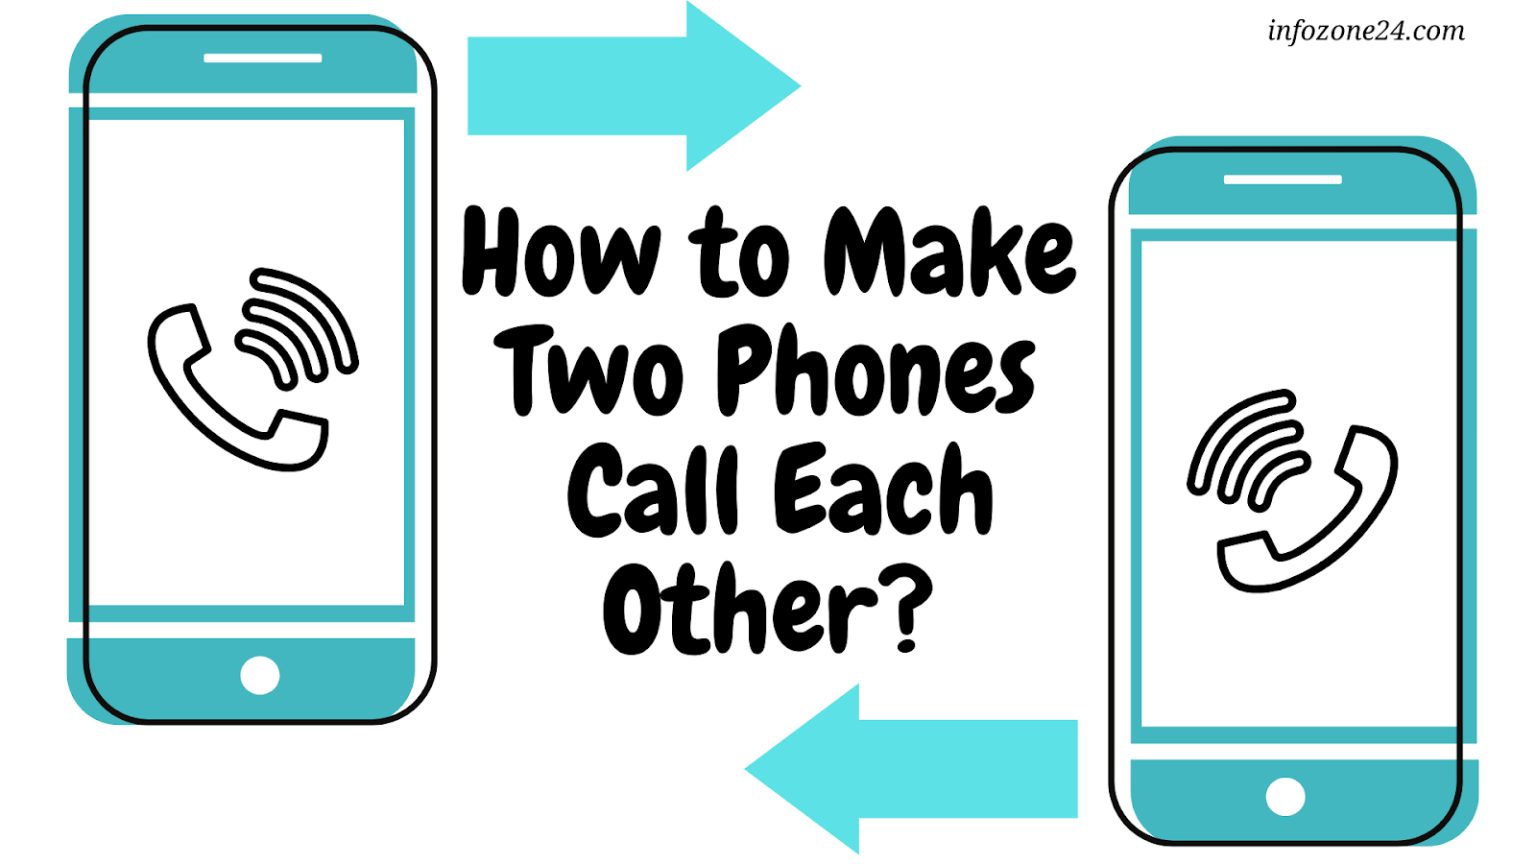 how-to-make-two-phones-call-each-other